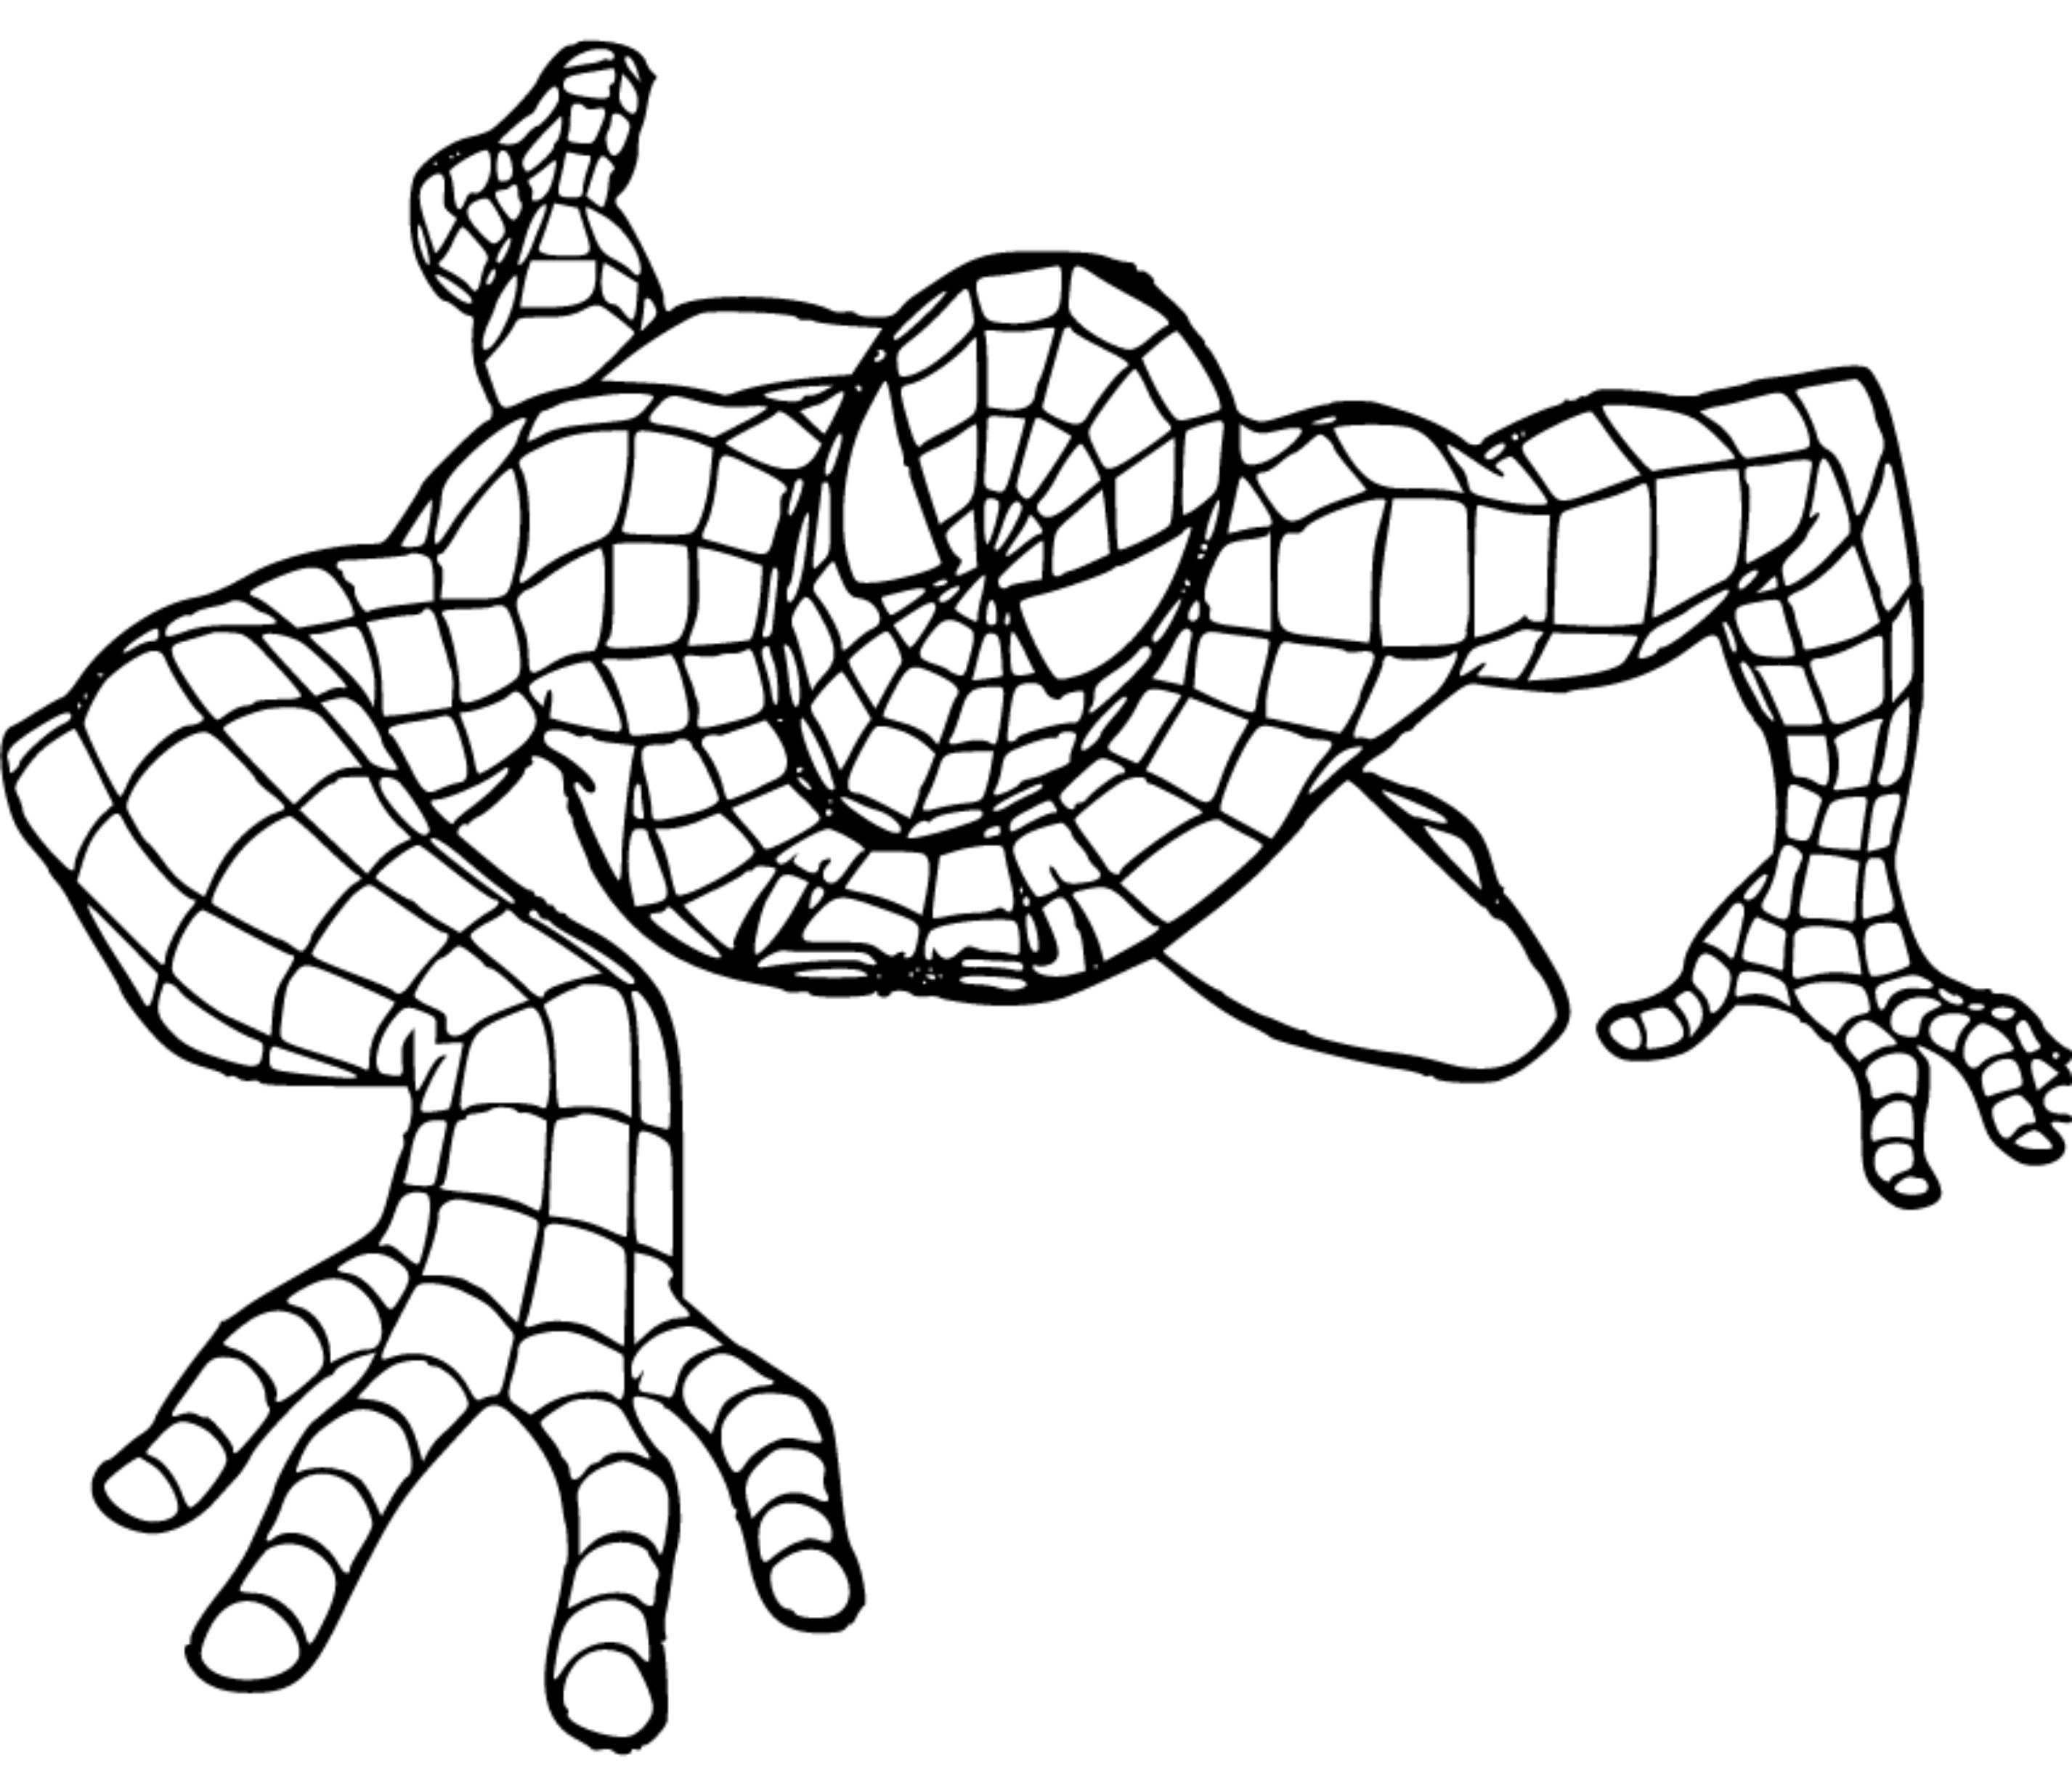 SpiderMan Coloring Page 18